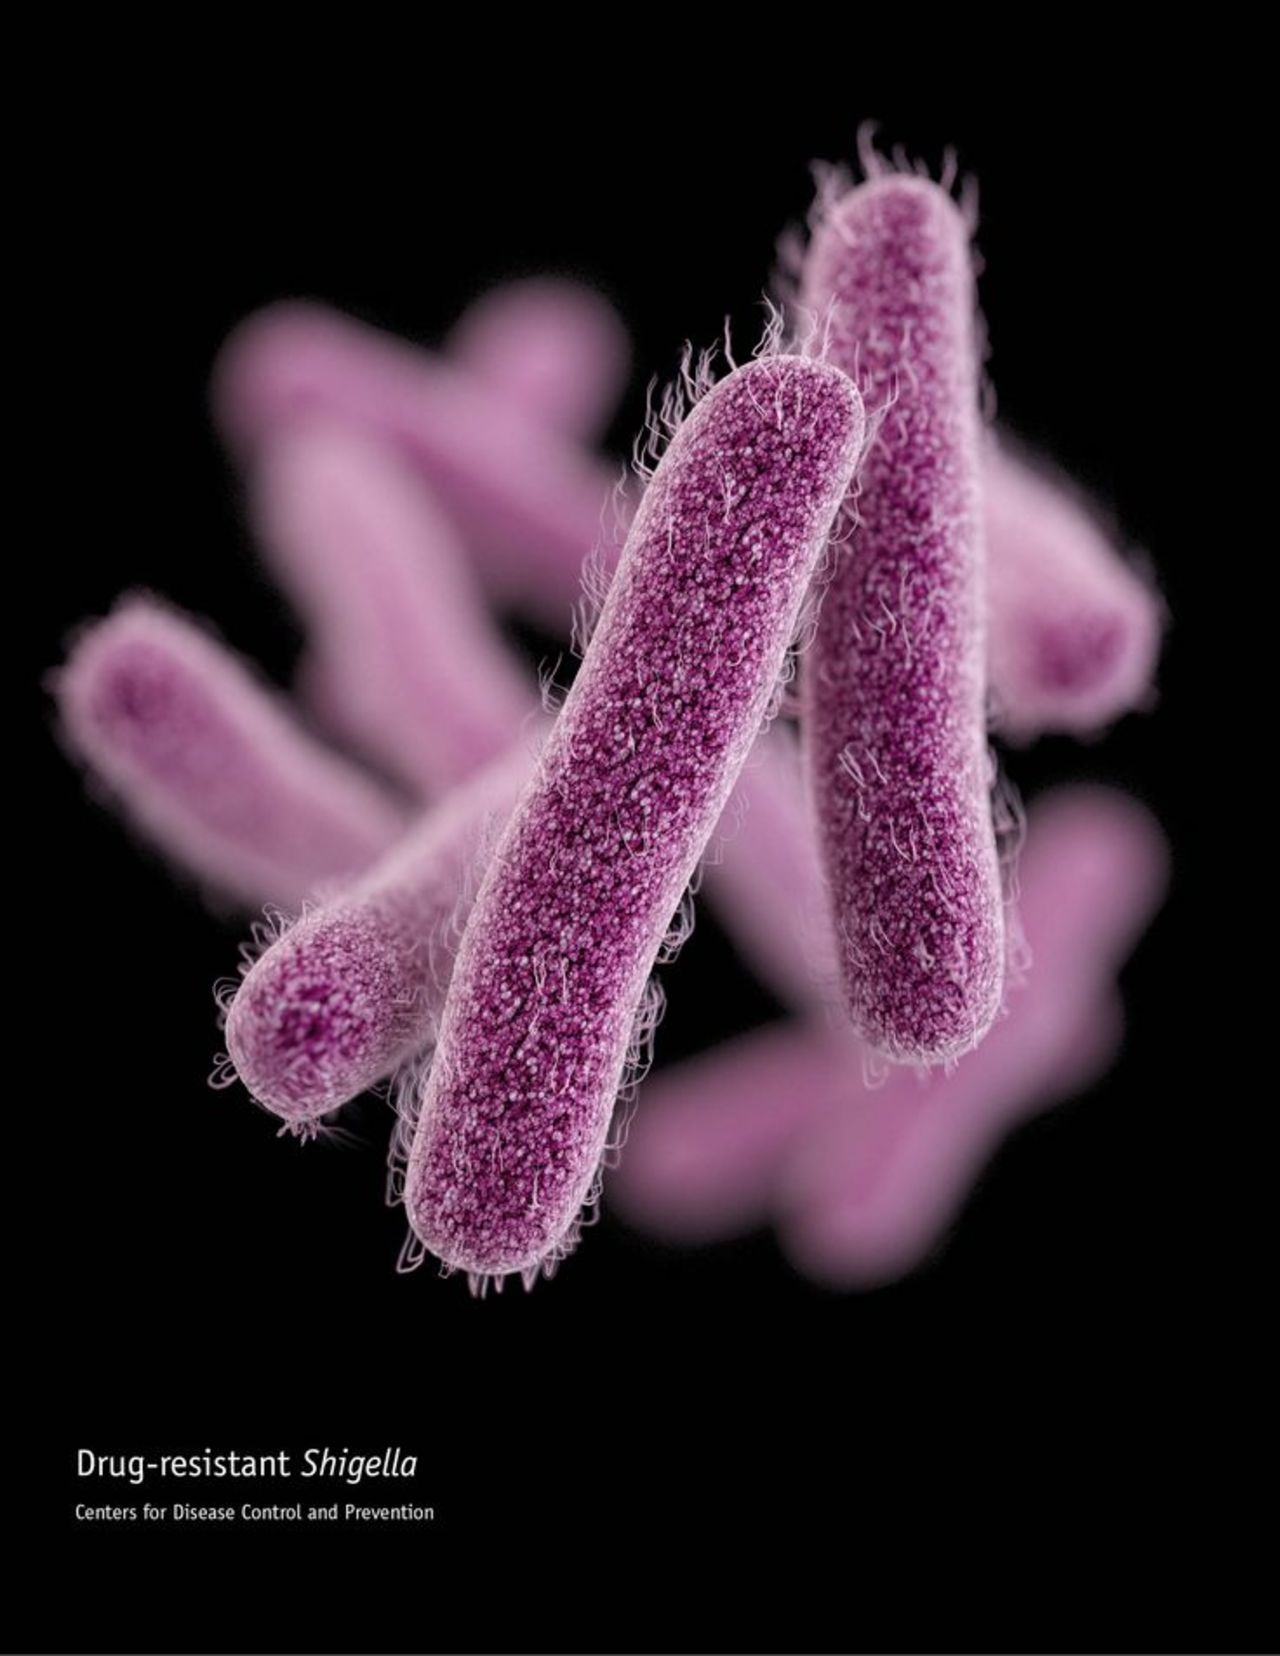 Shigella bacteria are showing resistance to fluoroquinolone and increasingly to second-line drugs used against them. They infect the intestine and cause diarrhea.